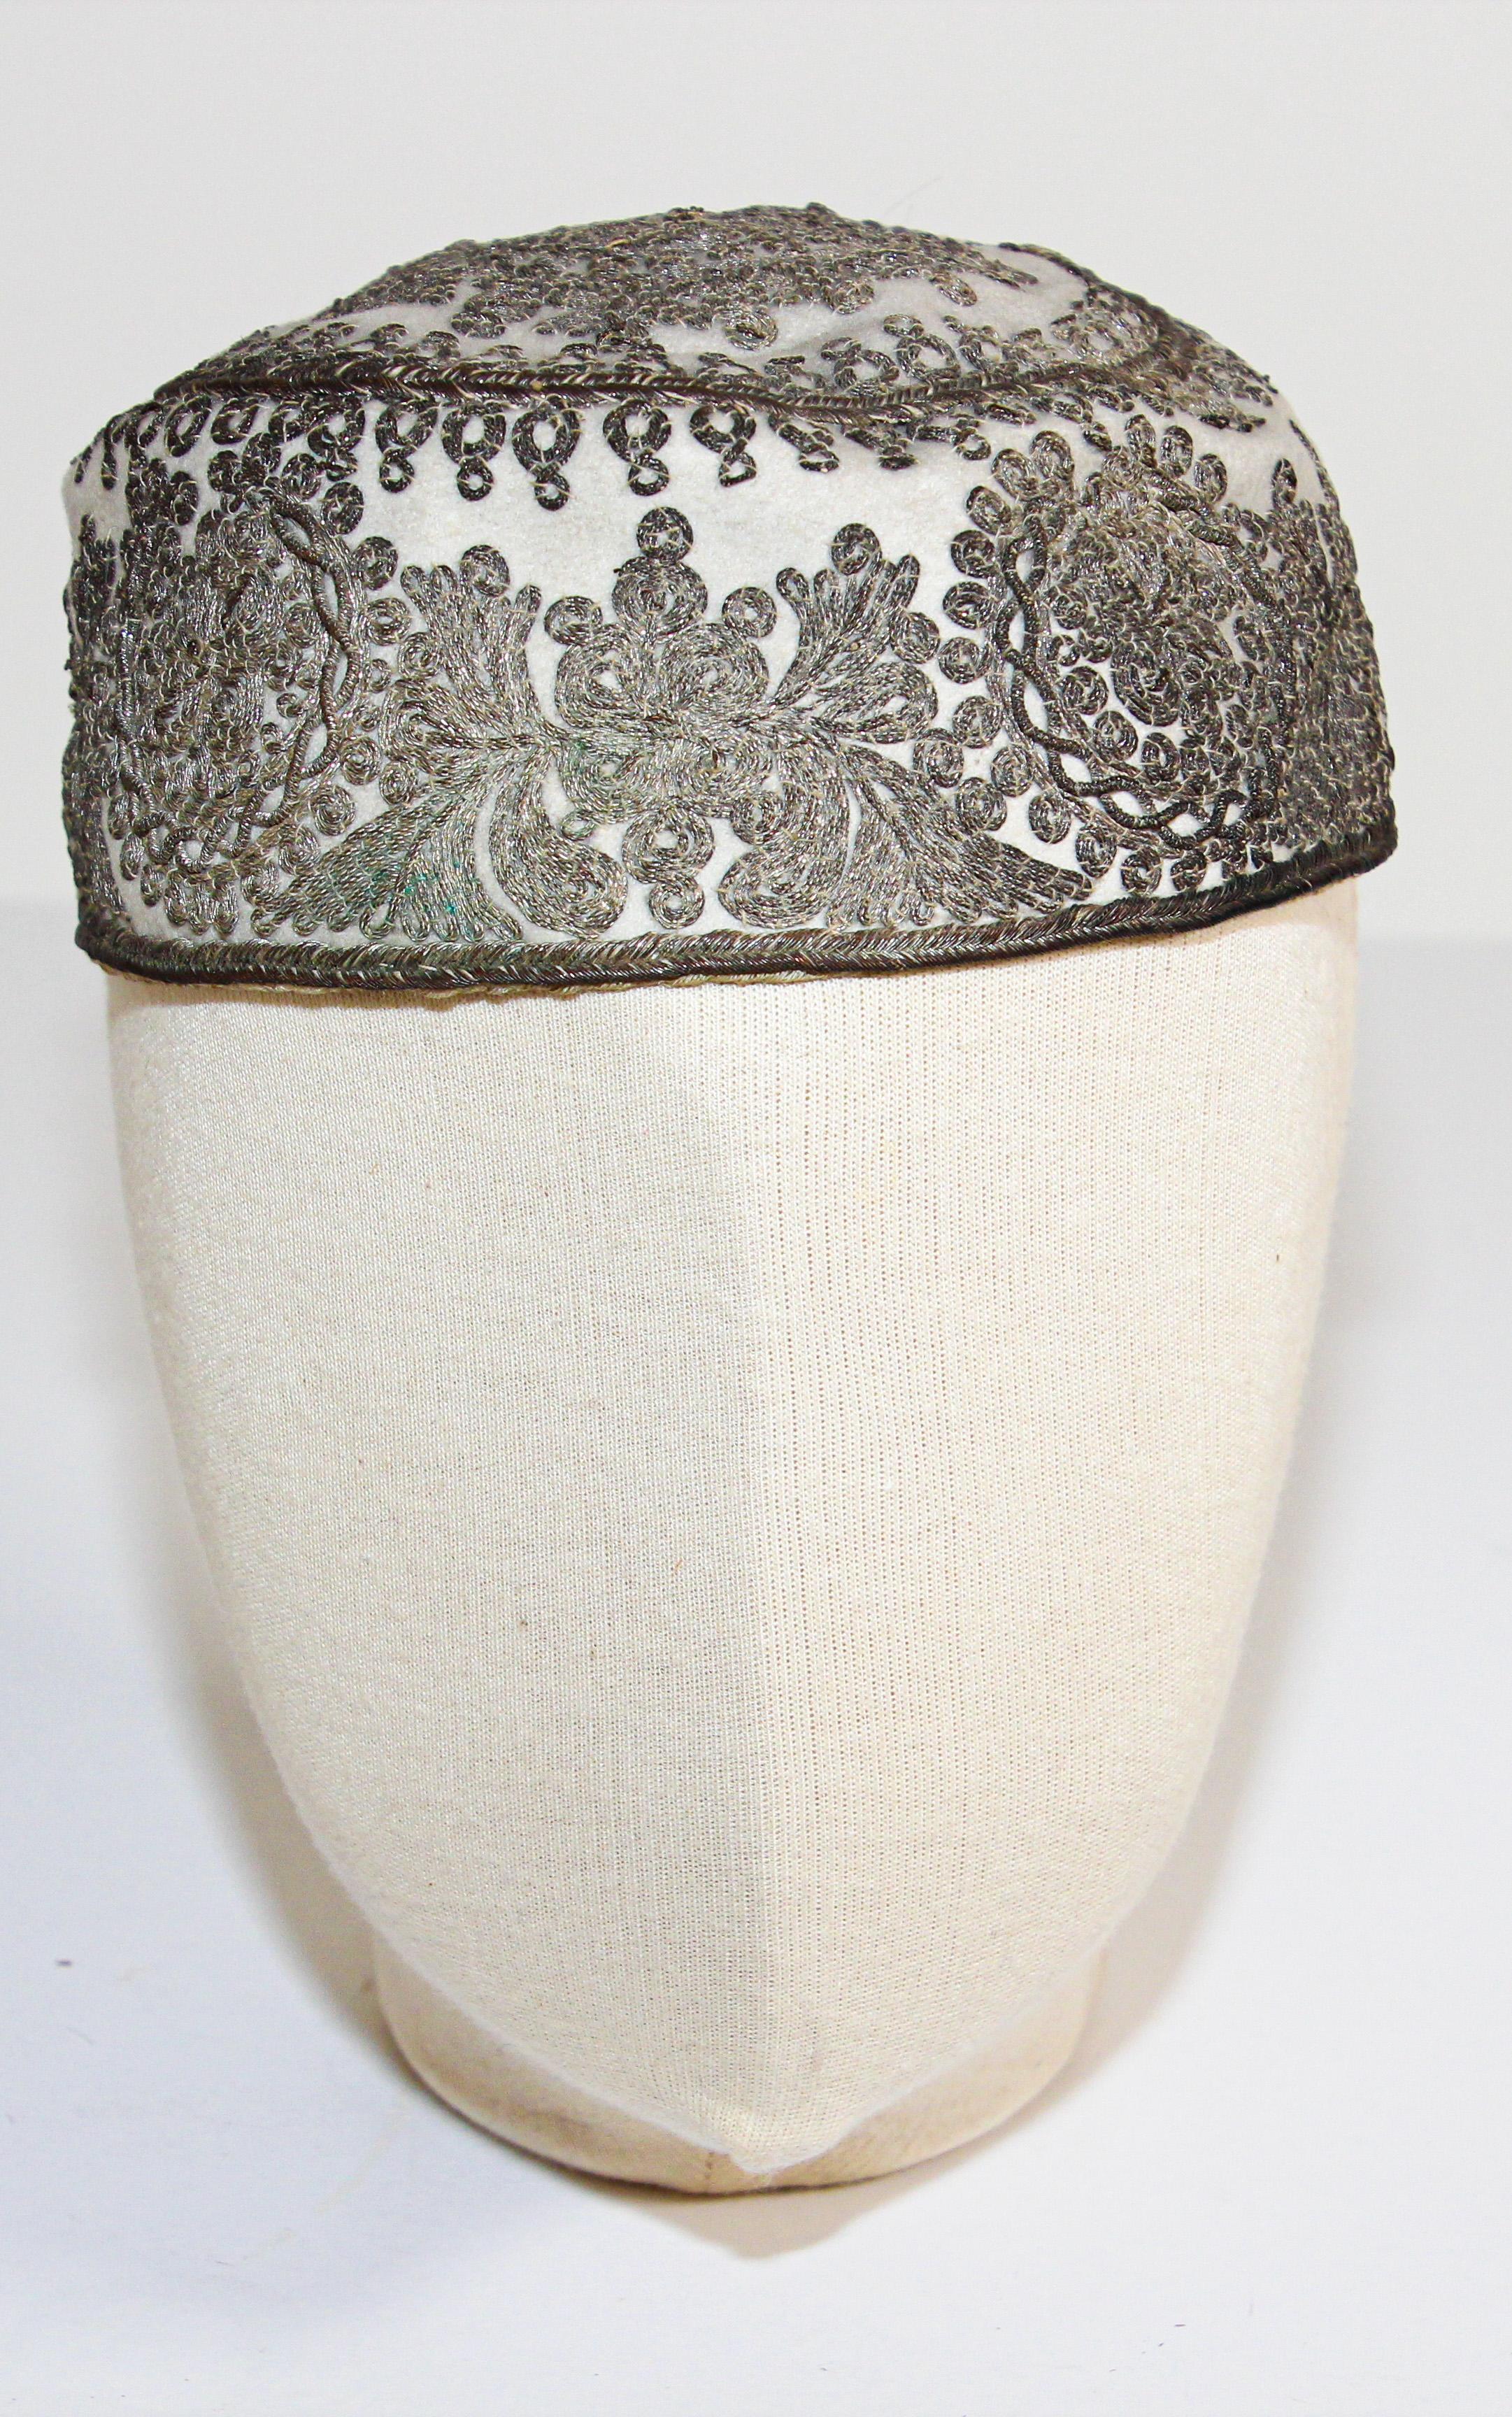 Embroidered silver Middle Eastern hat.
Probably Turkish.
Collectible antique textile inside is very worn.
Measures: Hat: 3